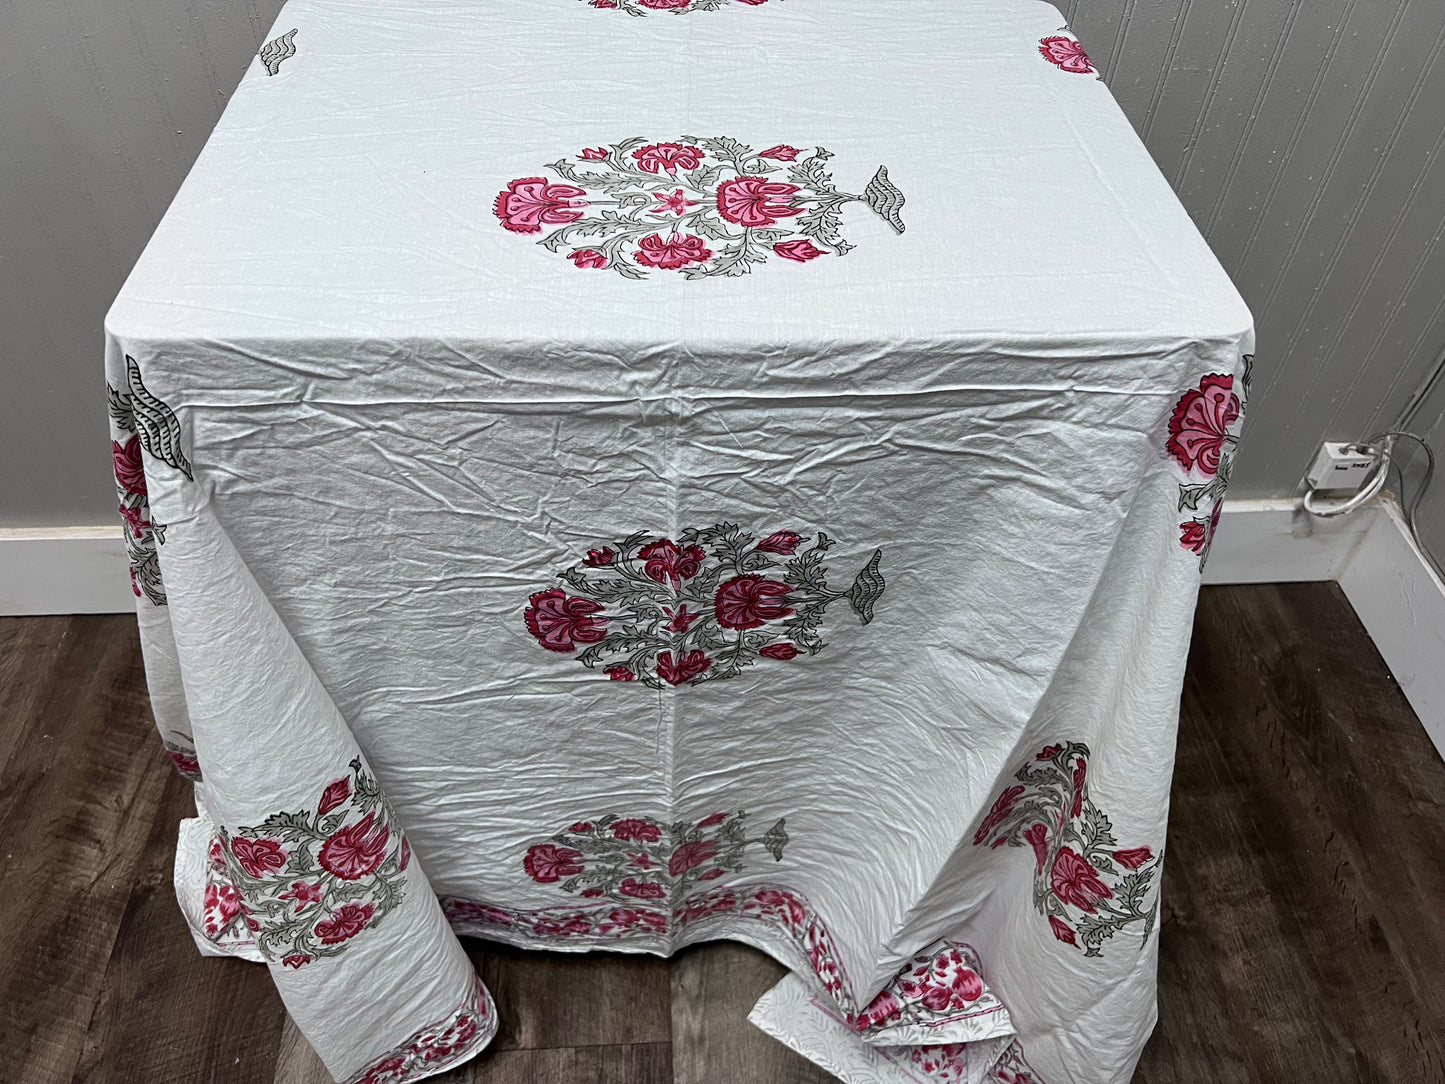 Indian Tablecloths